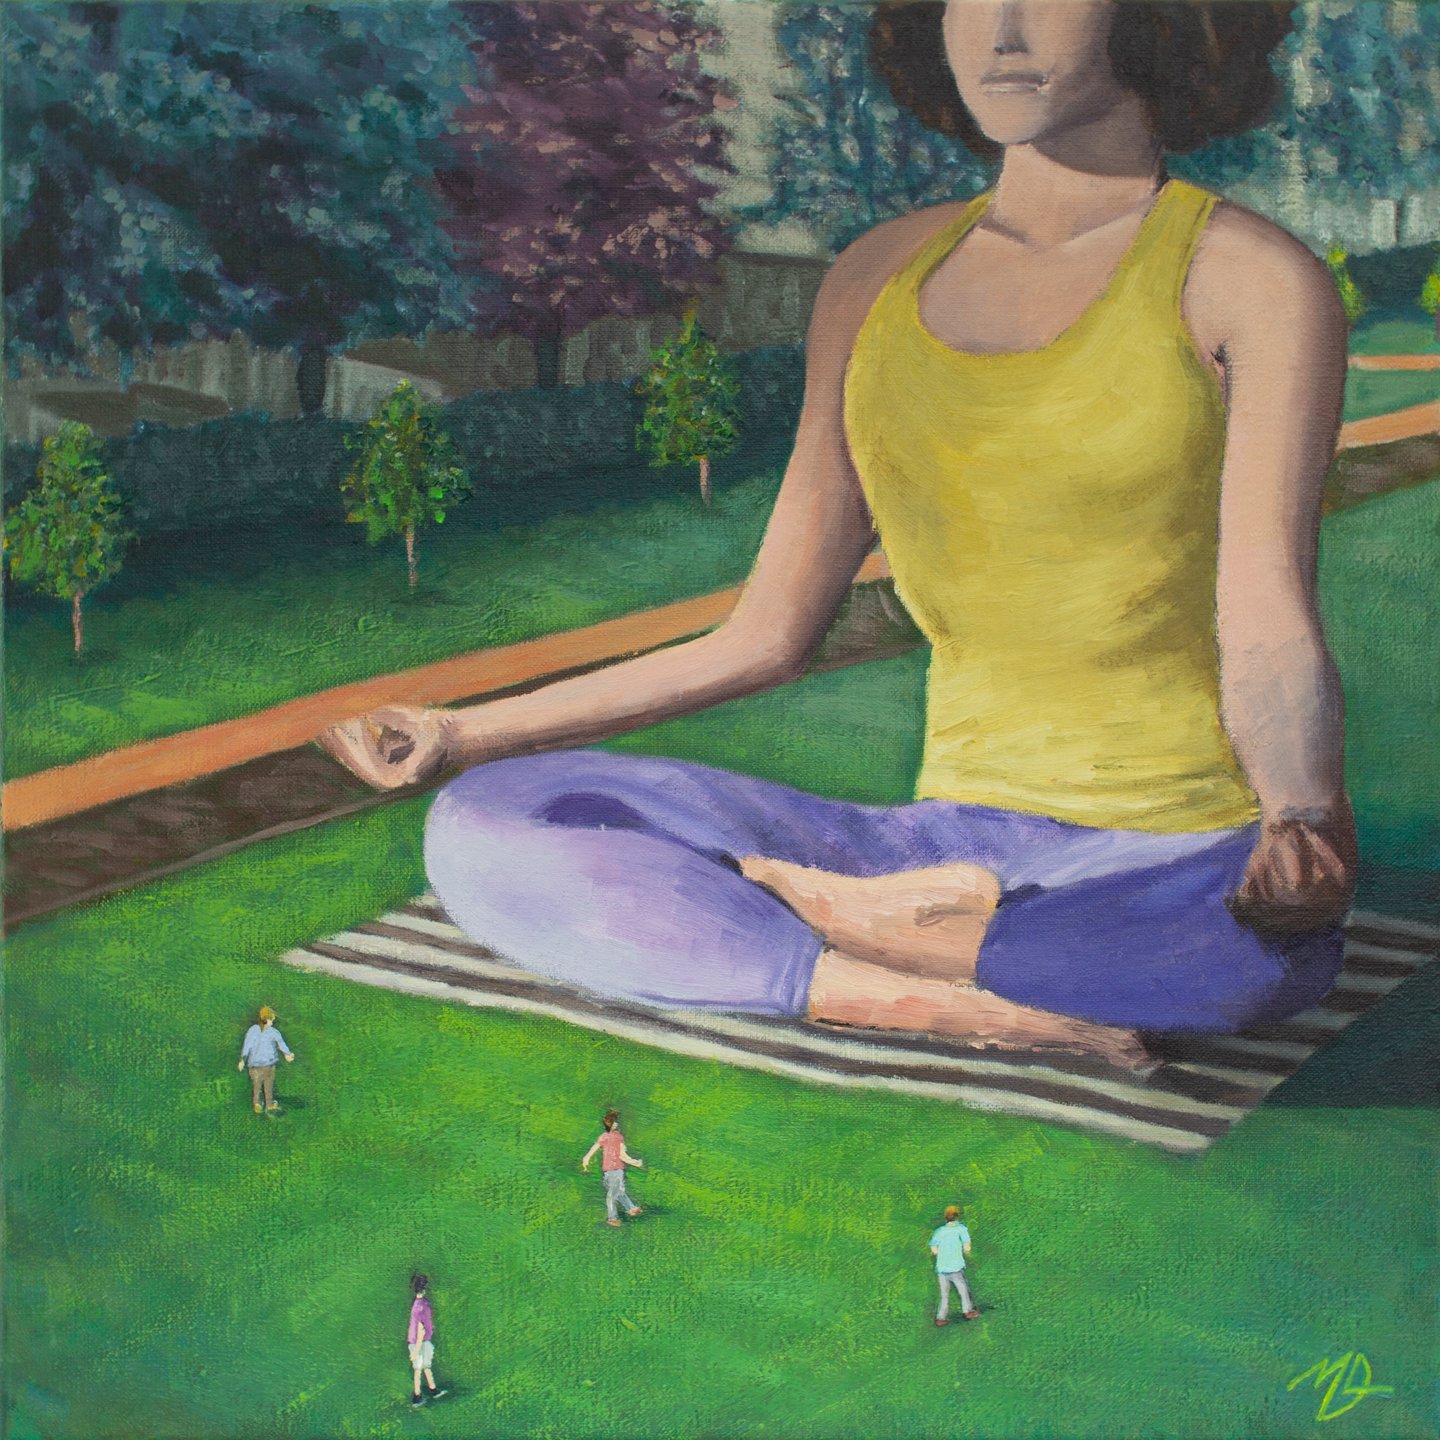 Oil painting of a gigantic woman showing off her meditation skills in a park.